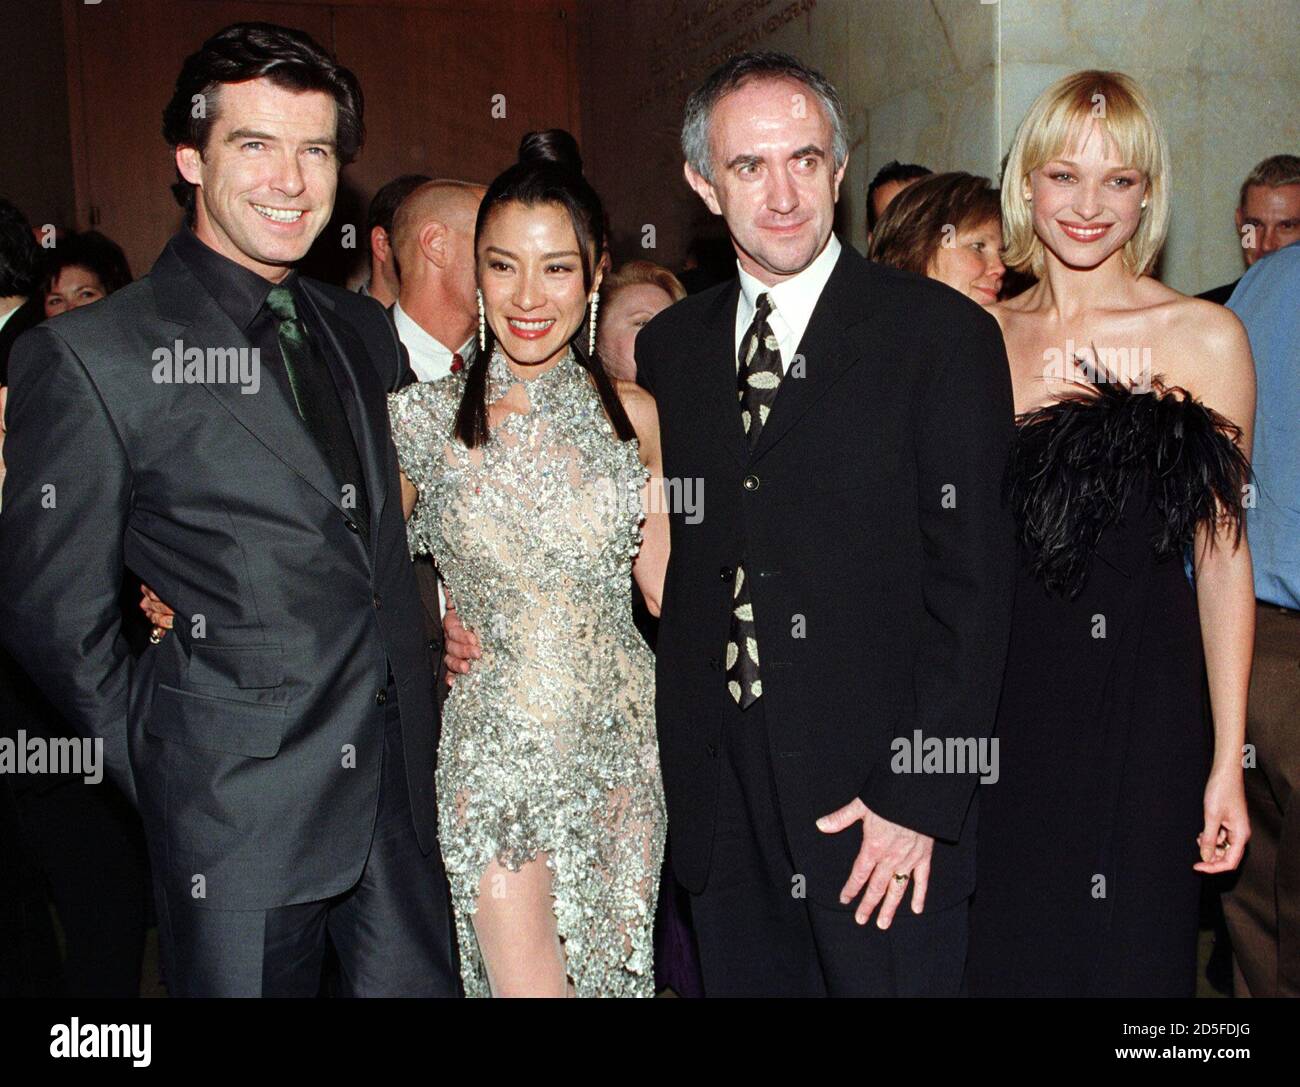 Cast members from the new film "Tomorrow Never Dies" pose together at the  party following the film's Los Angeles premiere December 16 at the Dorothy  Chandler Pavilion. Shown (L-R) are Pierce Brosnan,